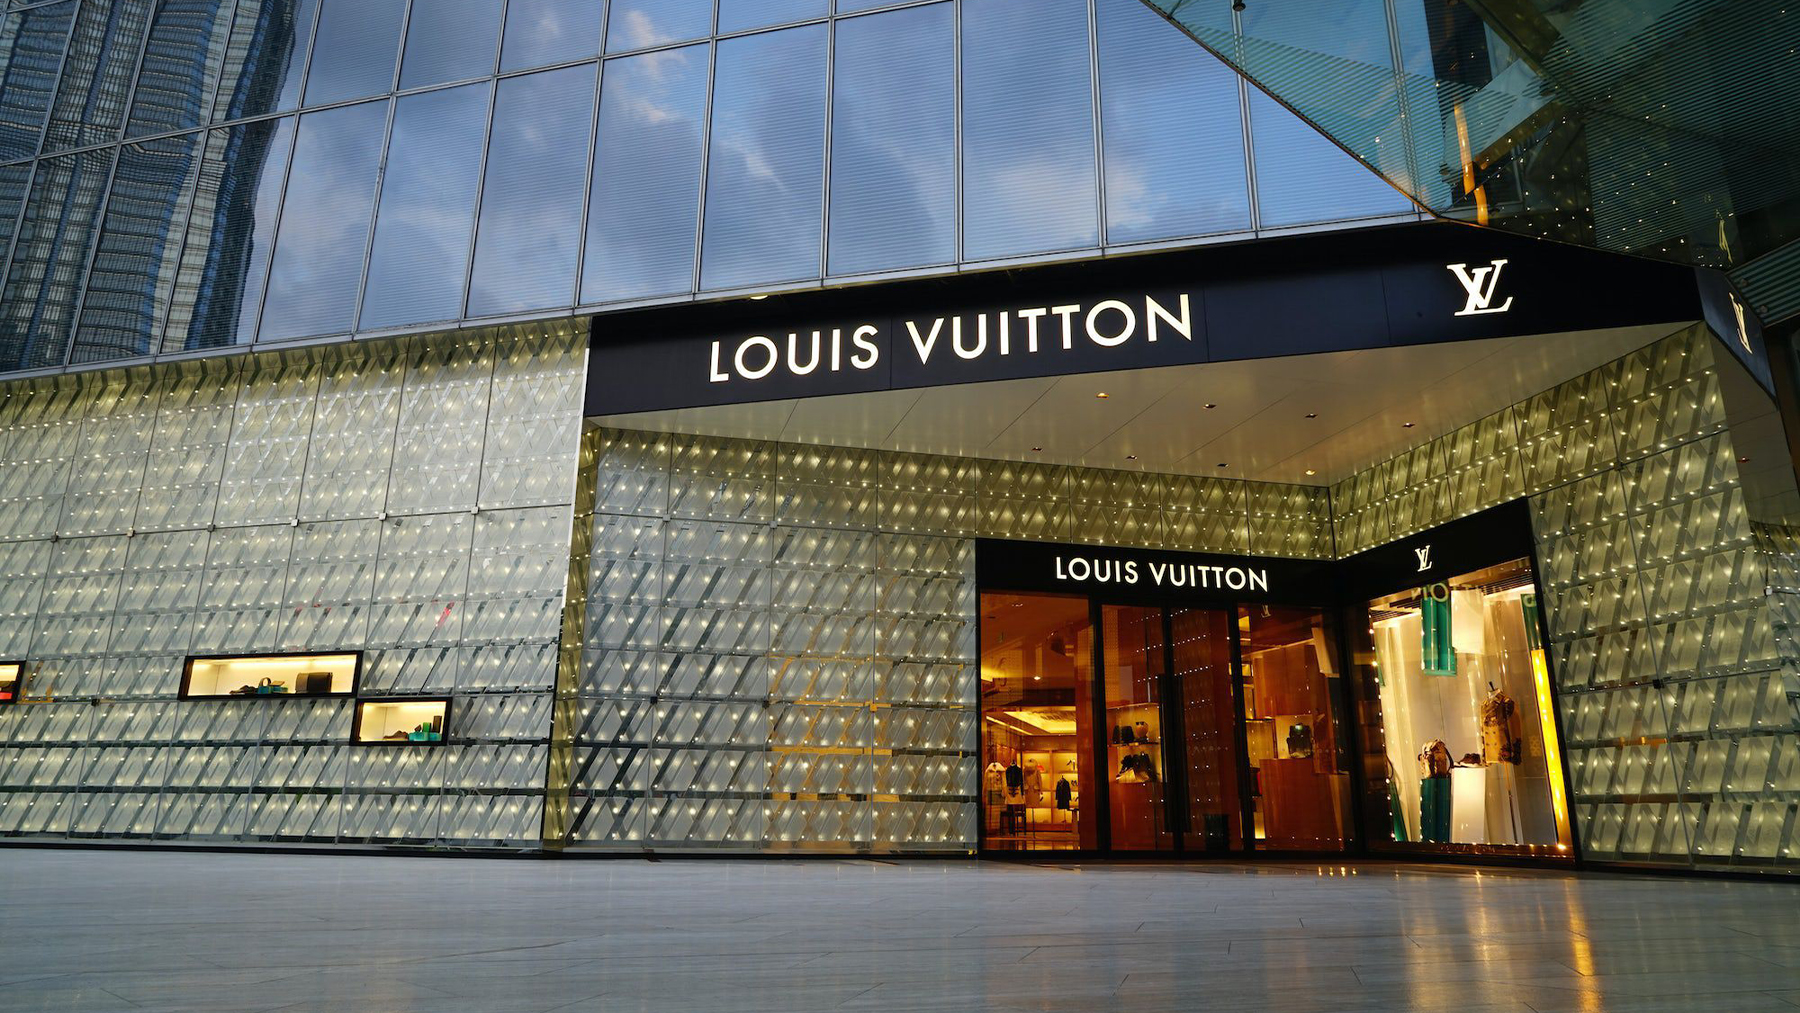 LVMH's Antoine Arnault: Luxury rivals must work together to tackle